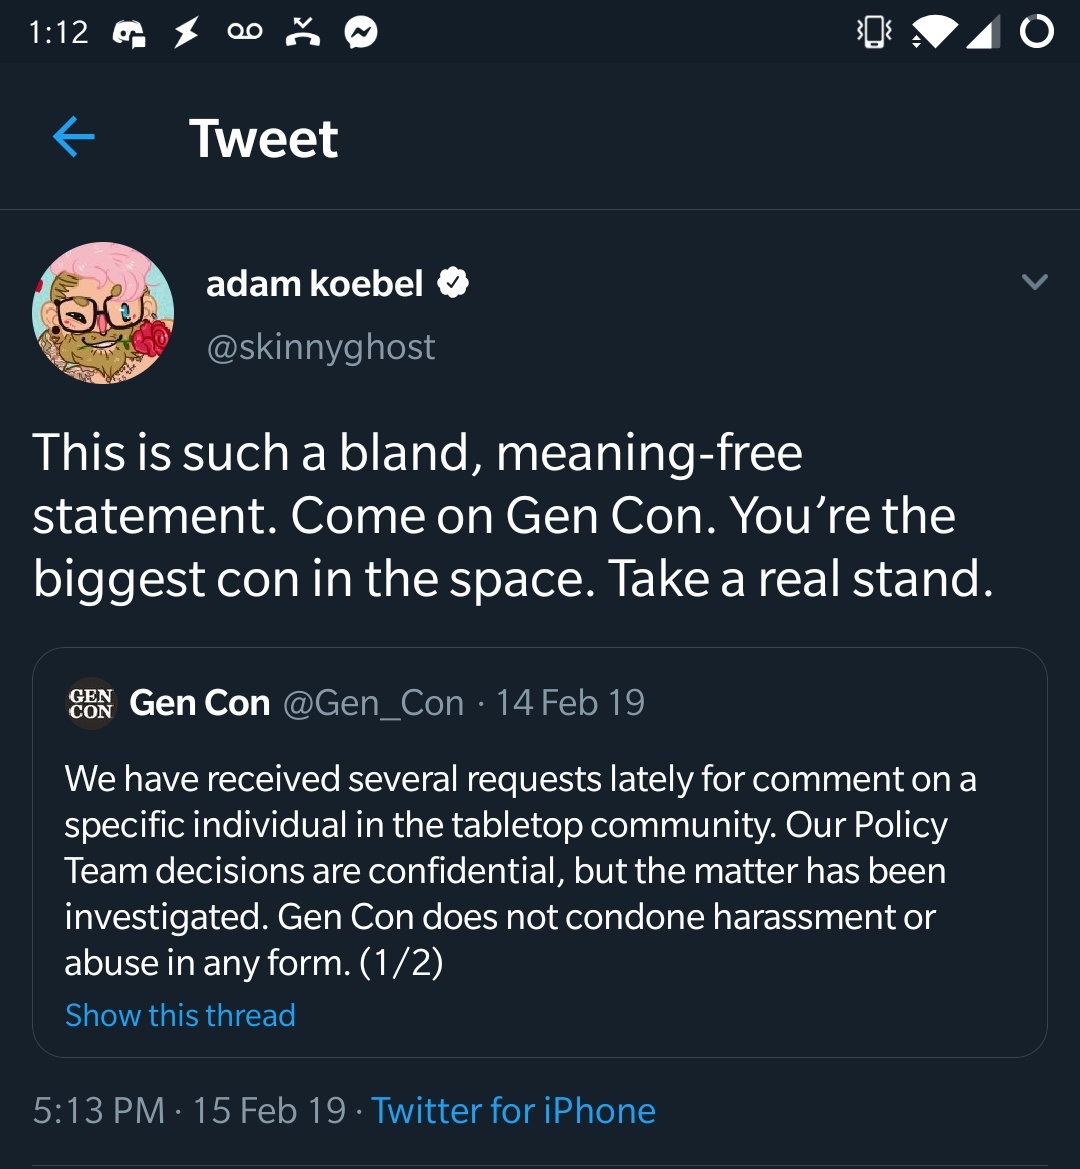 Adam clearly understands that safety is important and that folx should be held accountable. He just needs to take responsibility for his actions with a genuine apology. With an acknowledgement, wide-scale, of what he's done wrong.